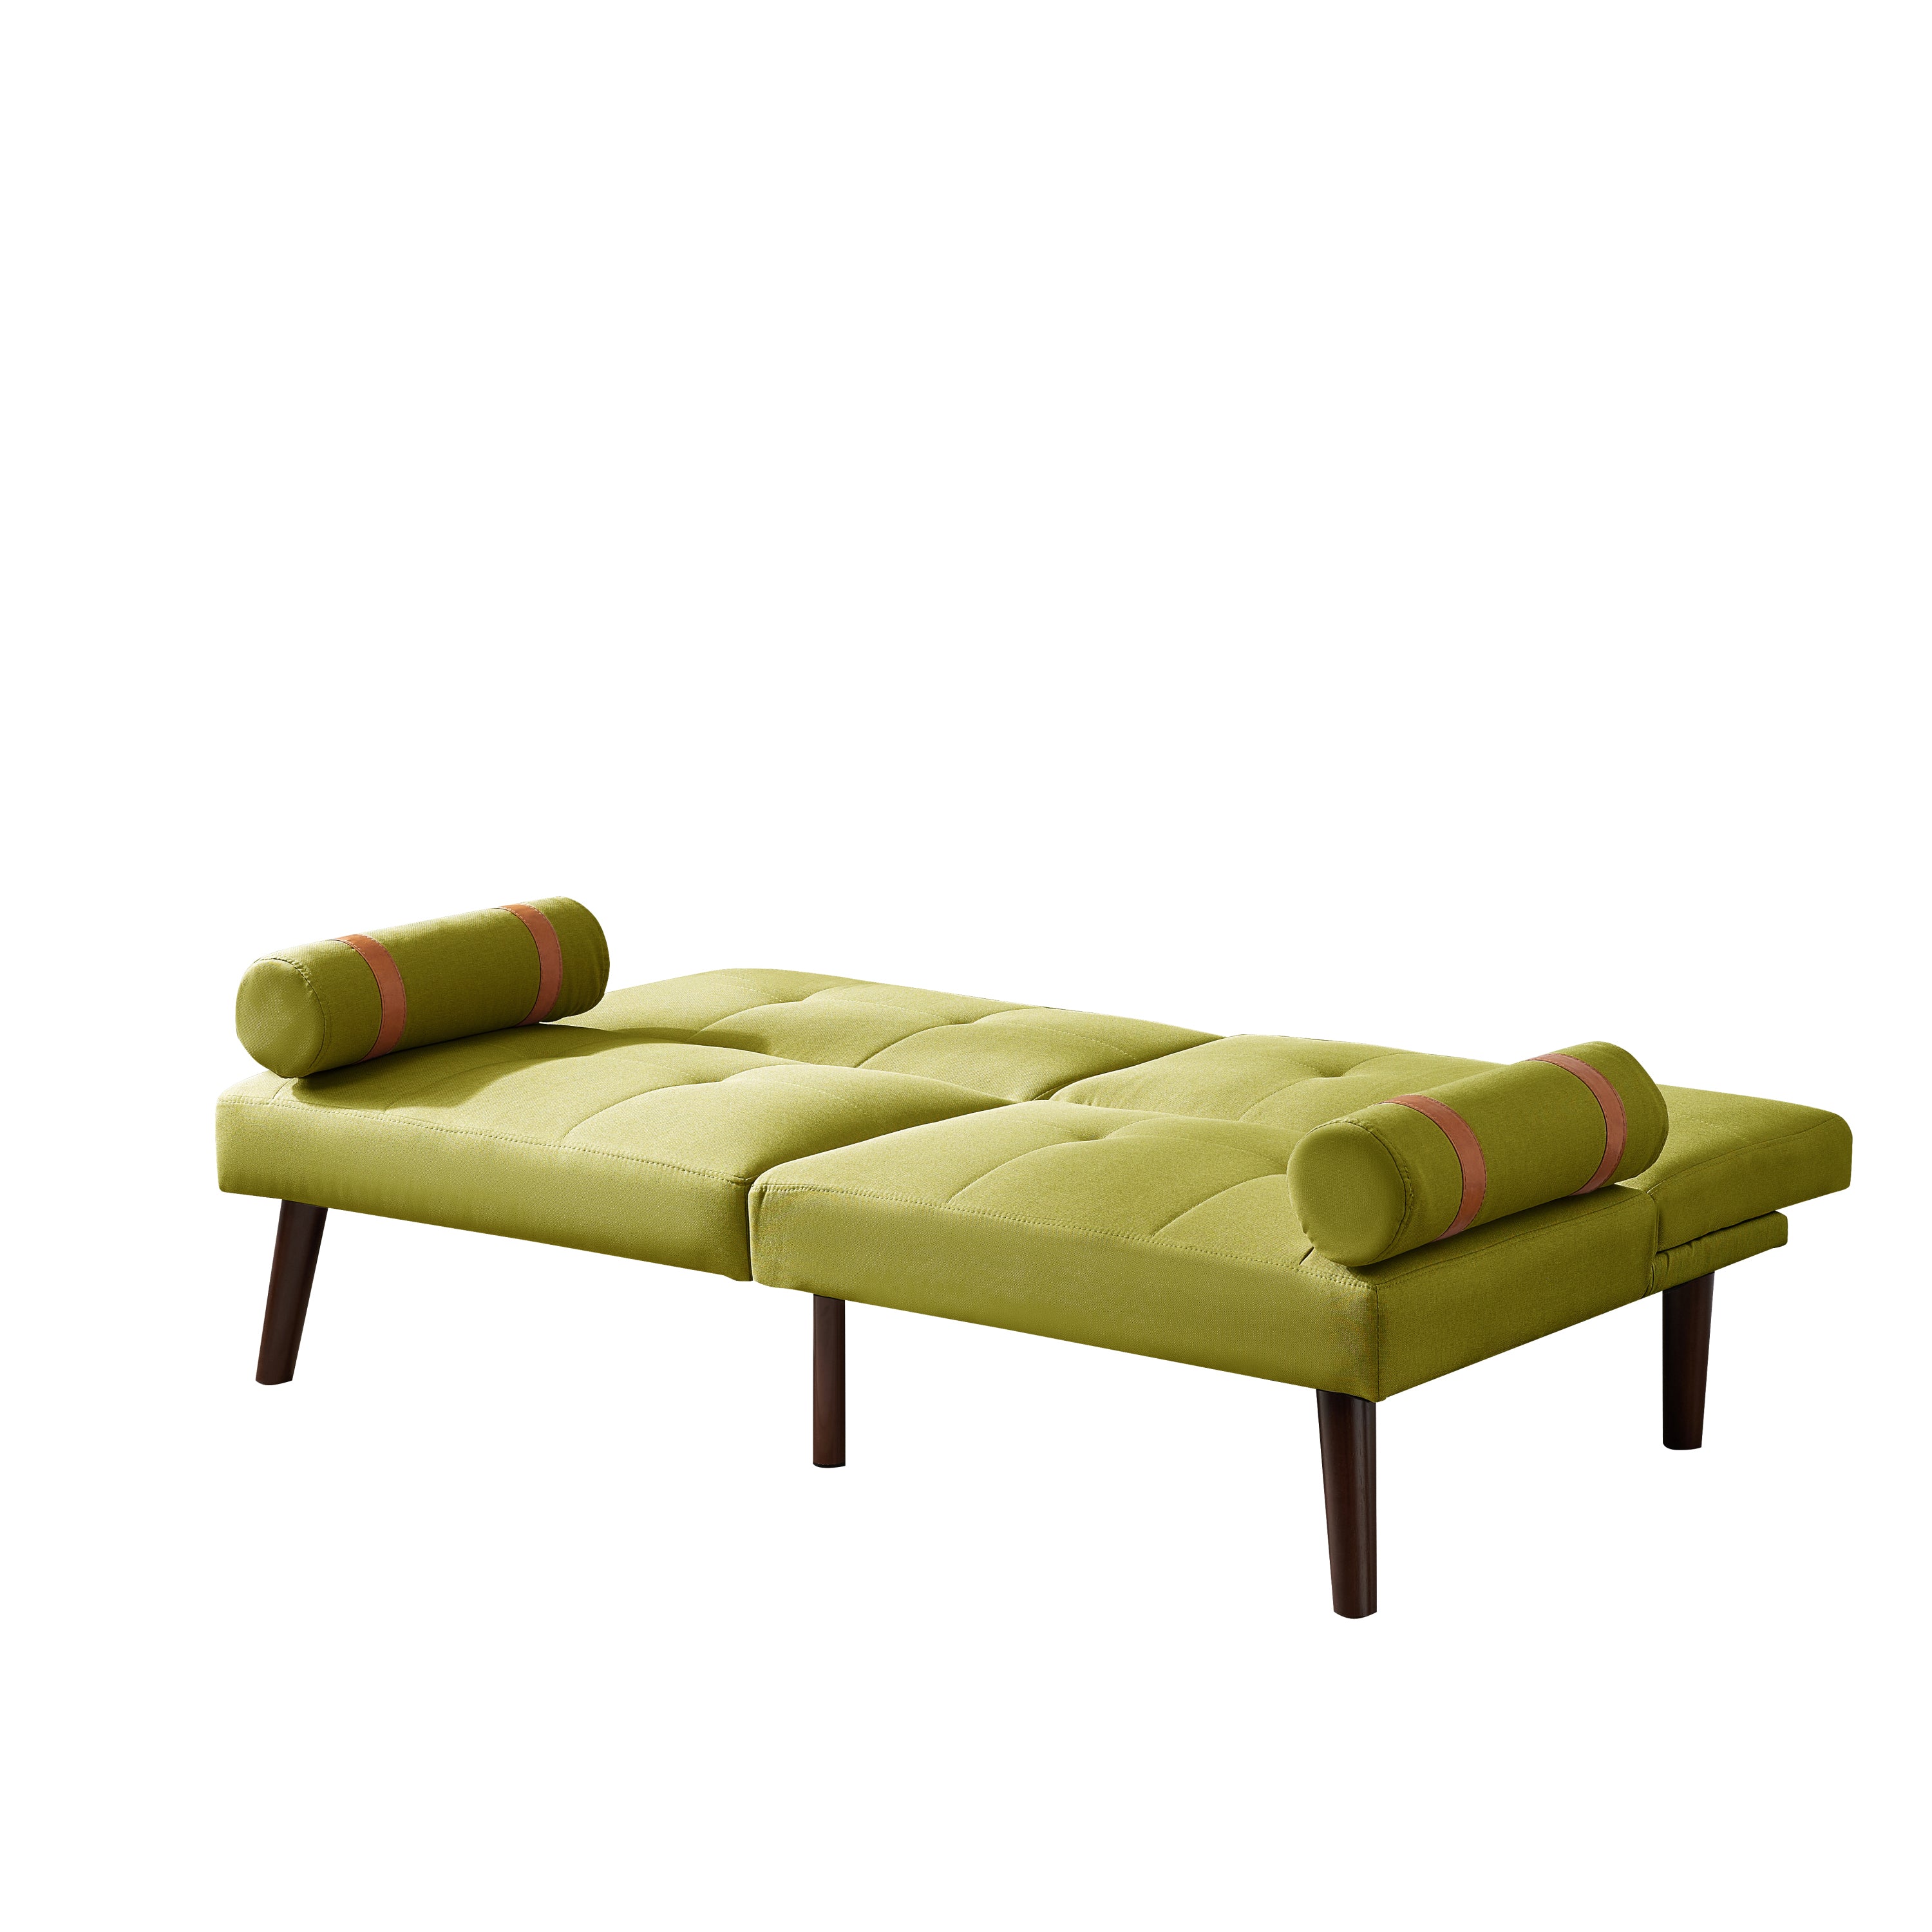 Convertible Sofa Bed Futon with Solid Wood Legs Linen Fabric Musterd Green